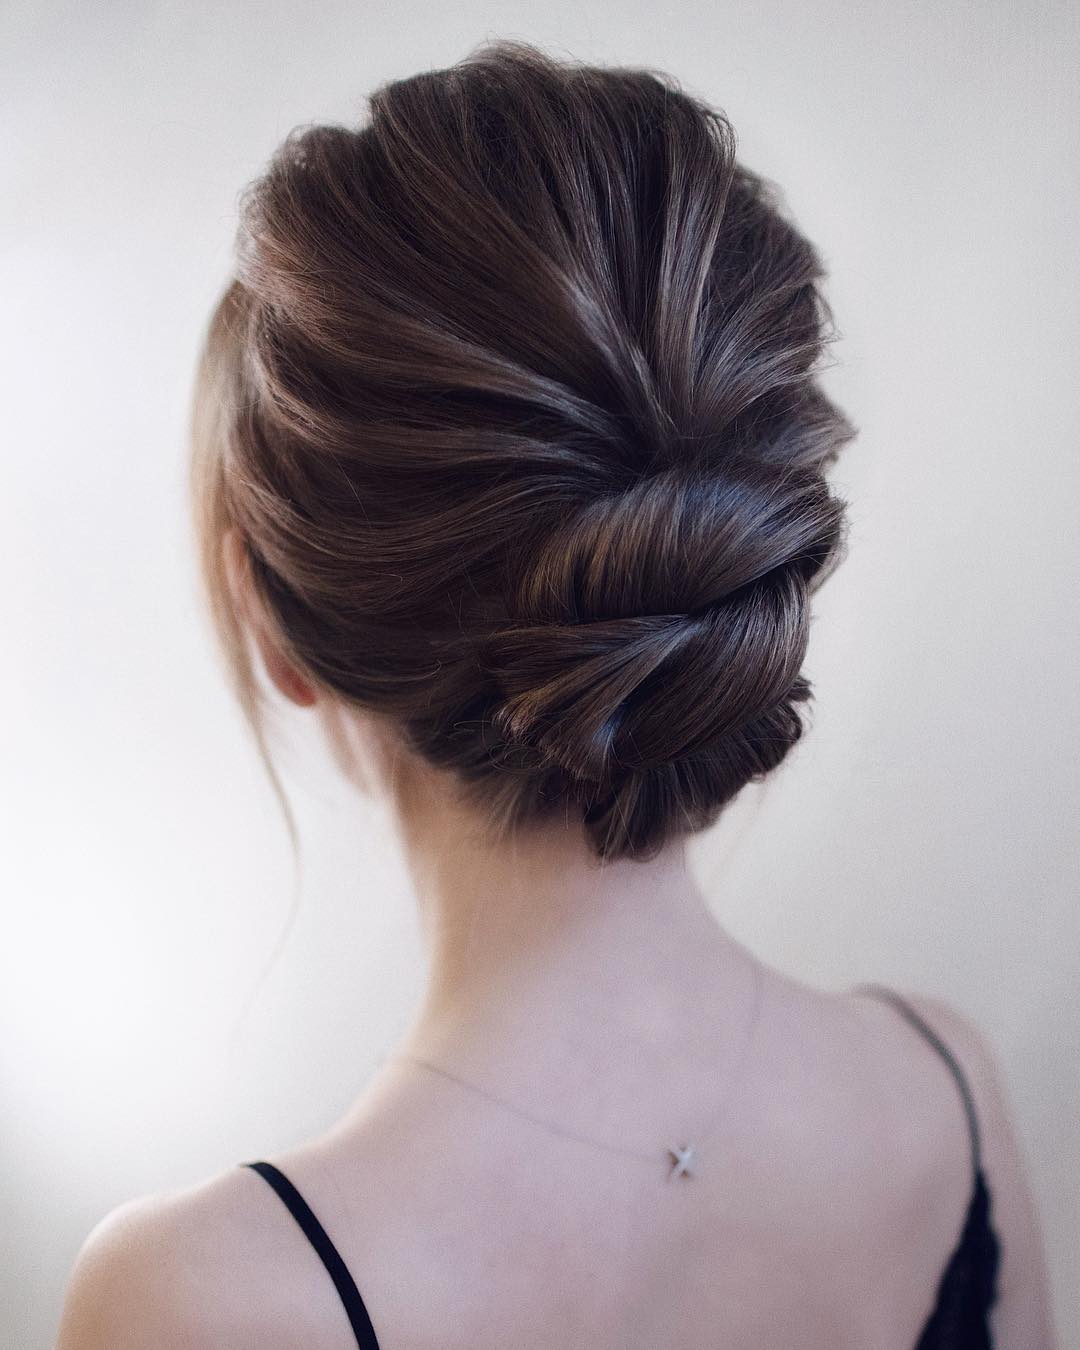 10 Updos For Medium Length Hair Prom Homecoming Hairstyle Ideas 2020